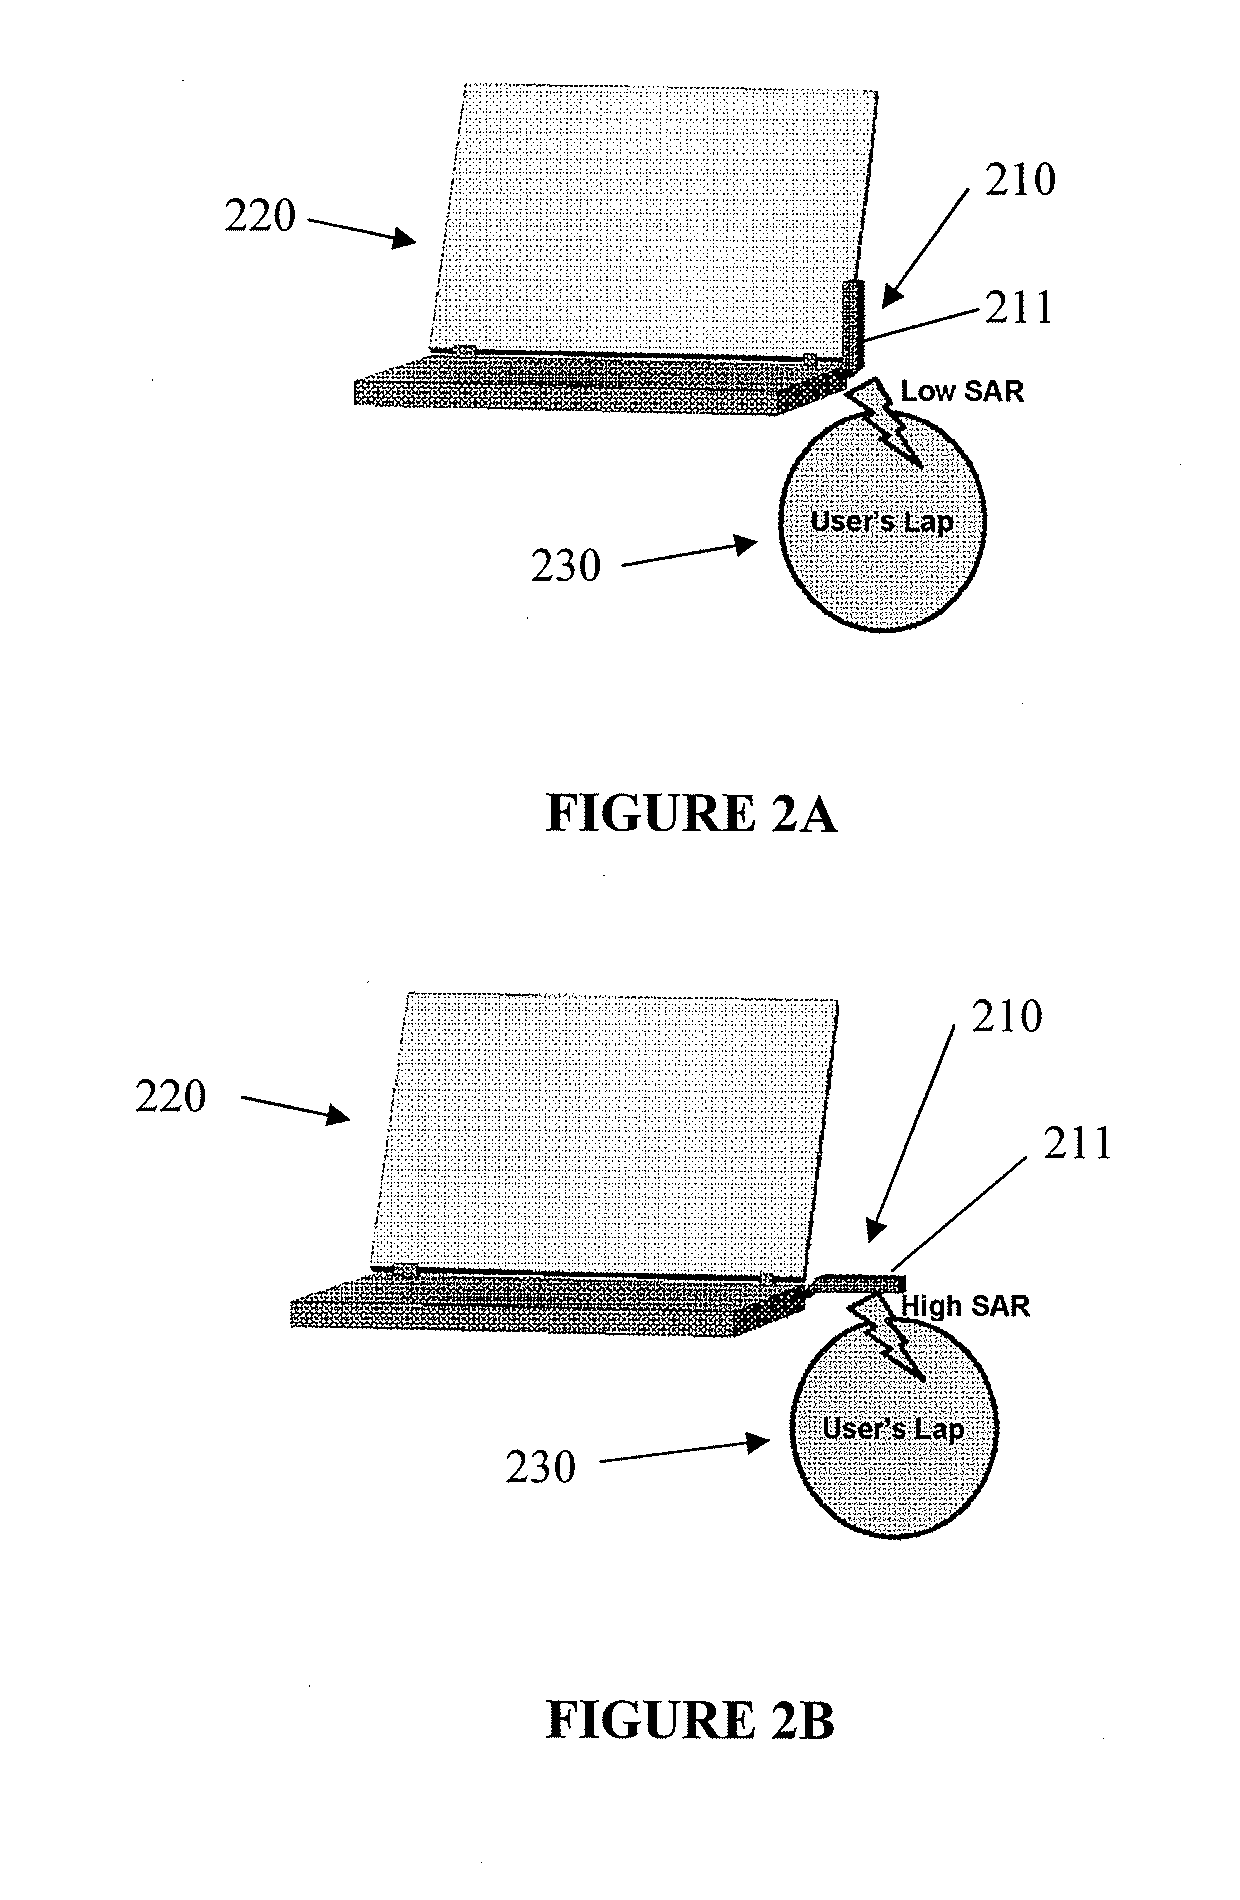 Method and apparatus for controlling radiation characteristics of transmitter of wireless device in correspondence with transmitter orientation